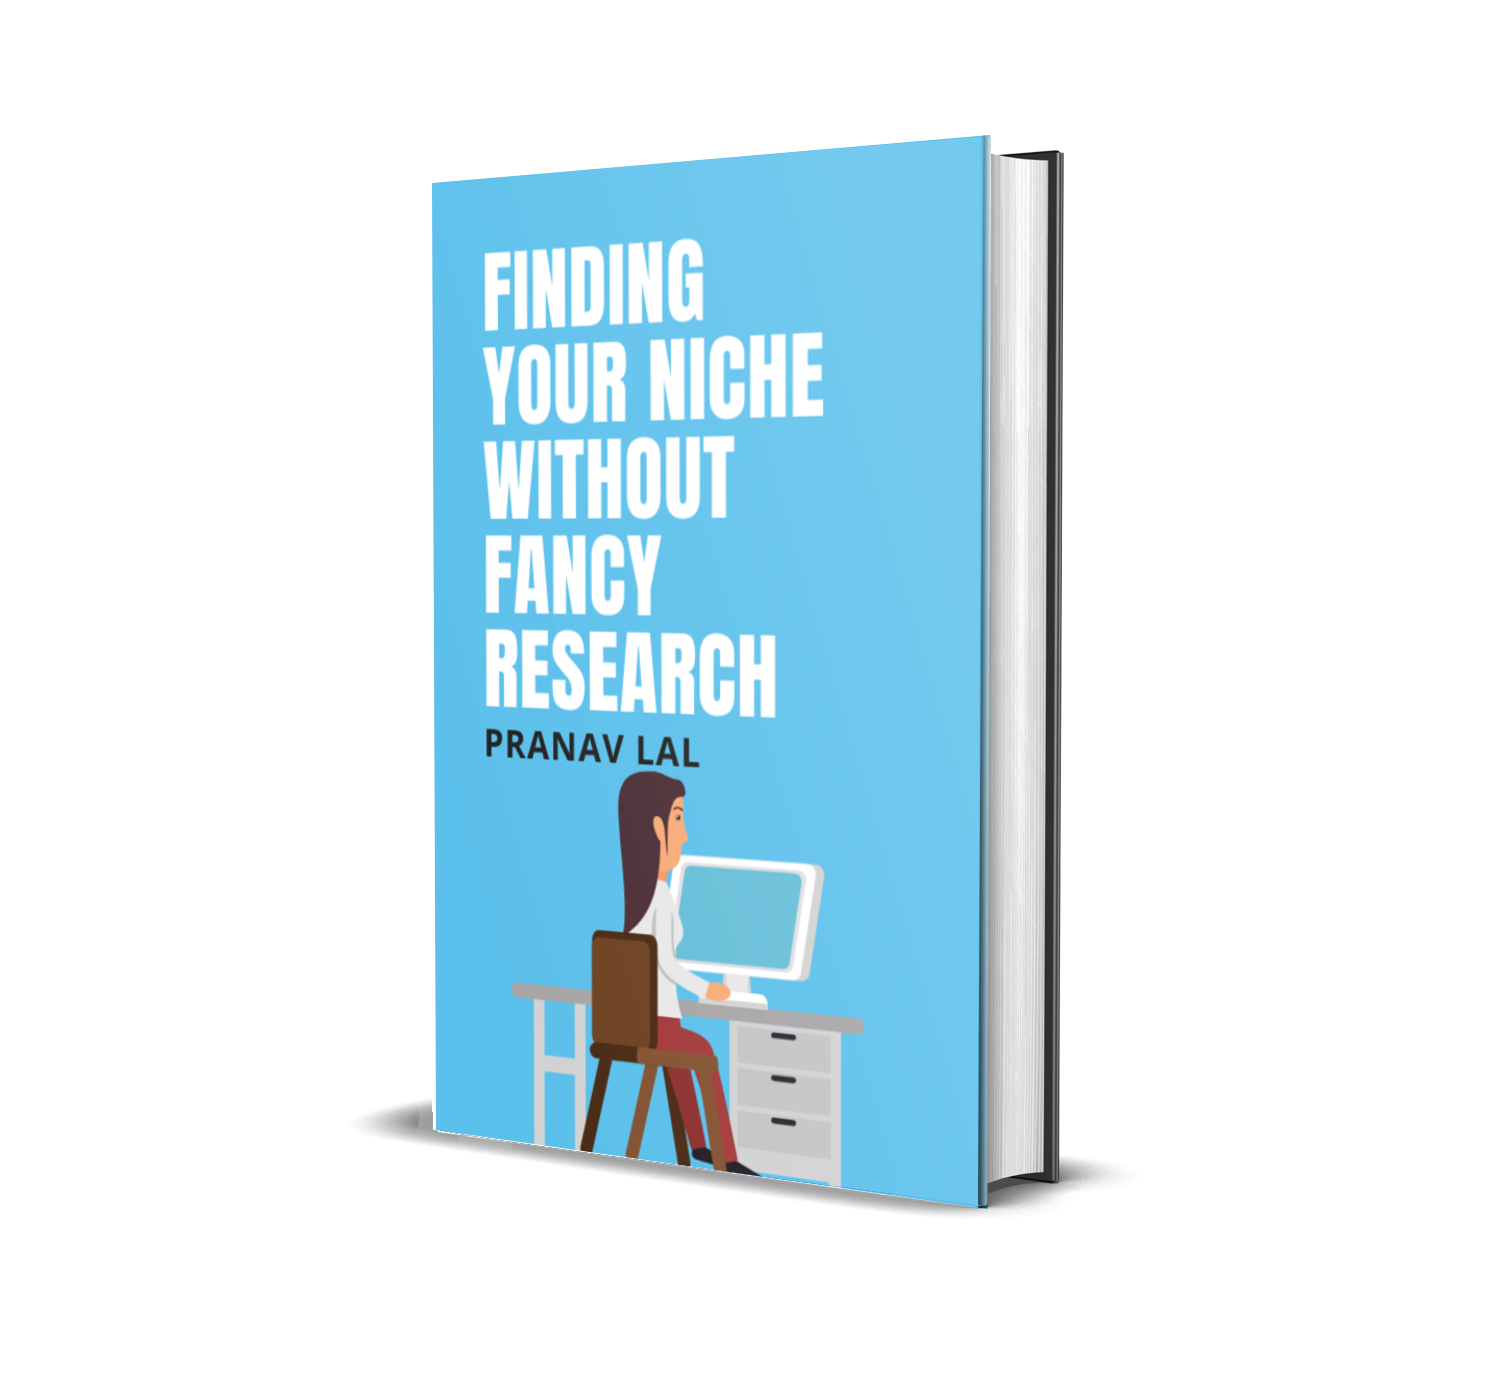 Finding a niche without fancy research